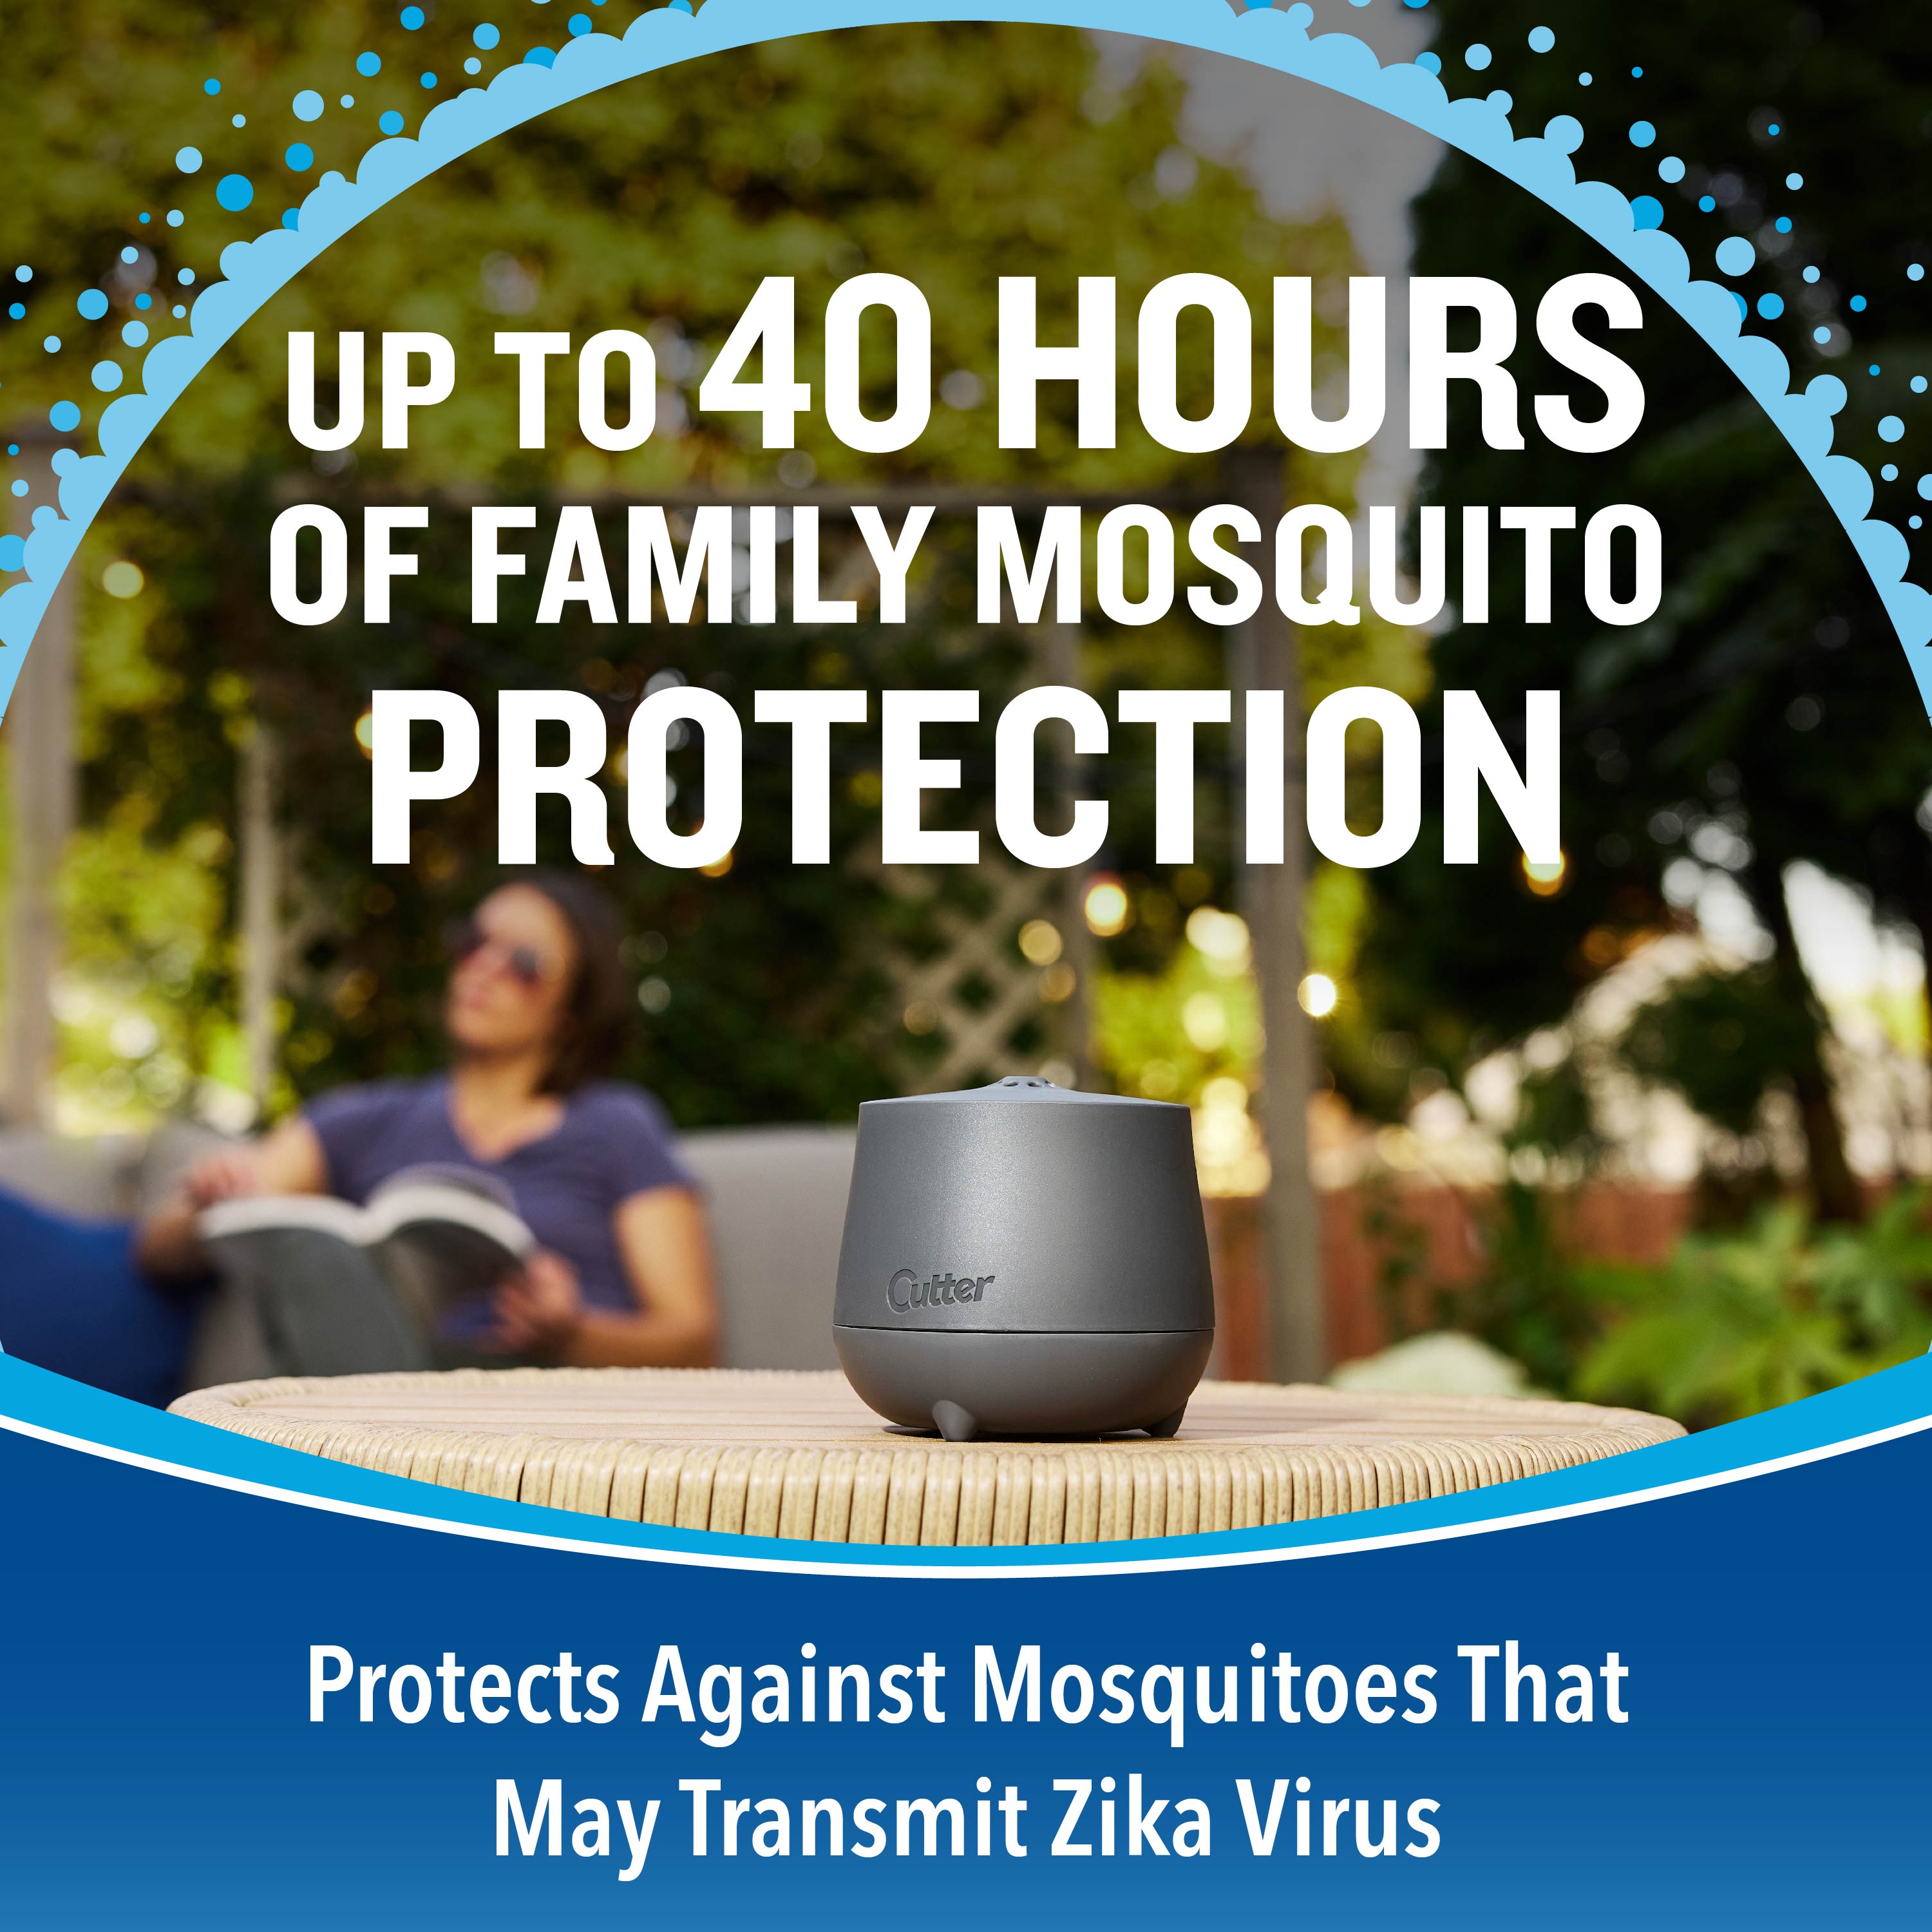 Eclipse™ Zone Mosquito Repellent Outdoor Device - Up to 40 Hours of Family Mosquito Protection